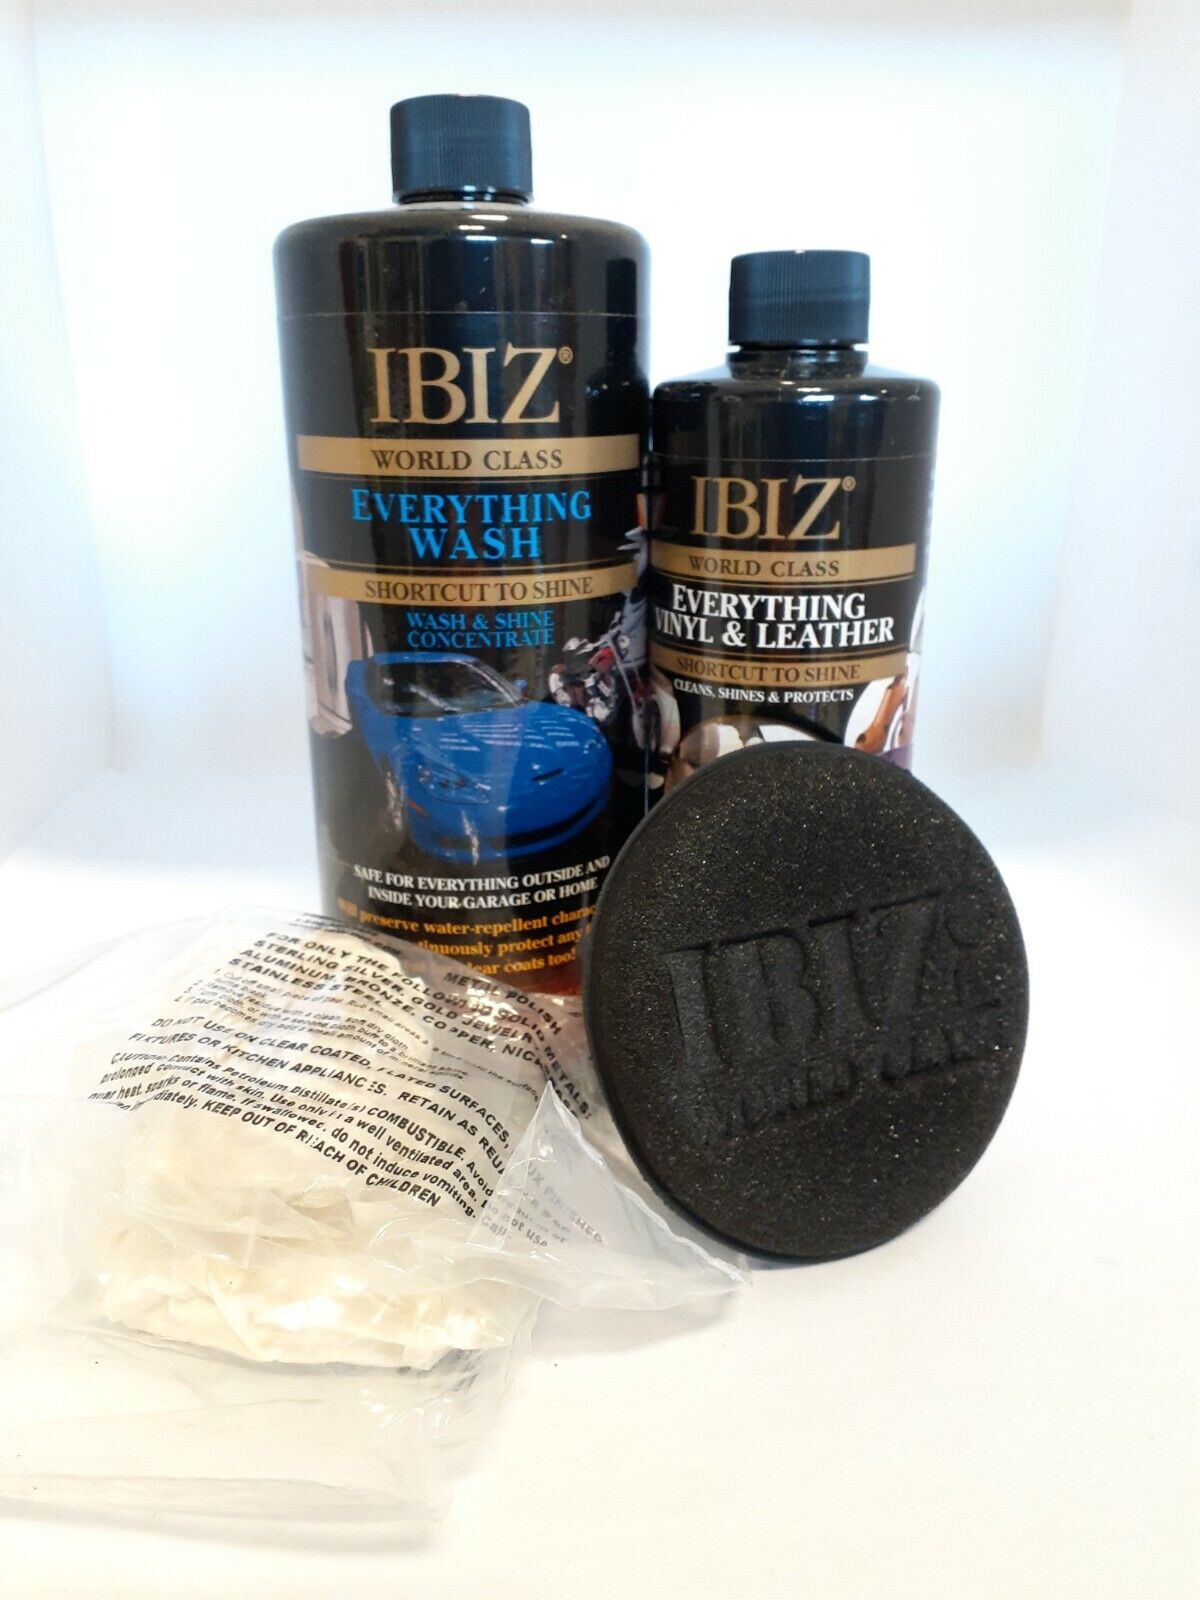 IBIZ WORLD CLASS Everythjng: Vinyl & Leather, and Wash. See description for more